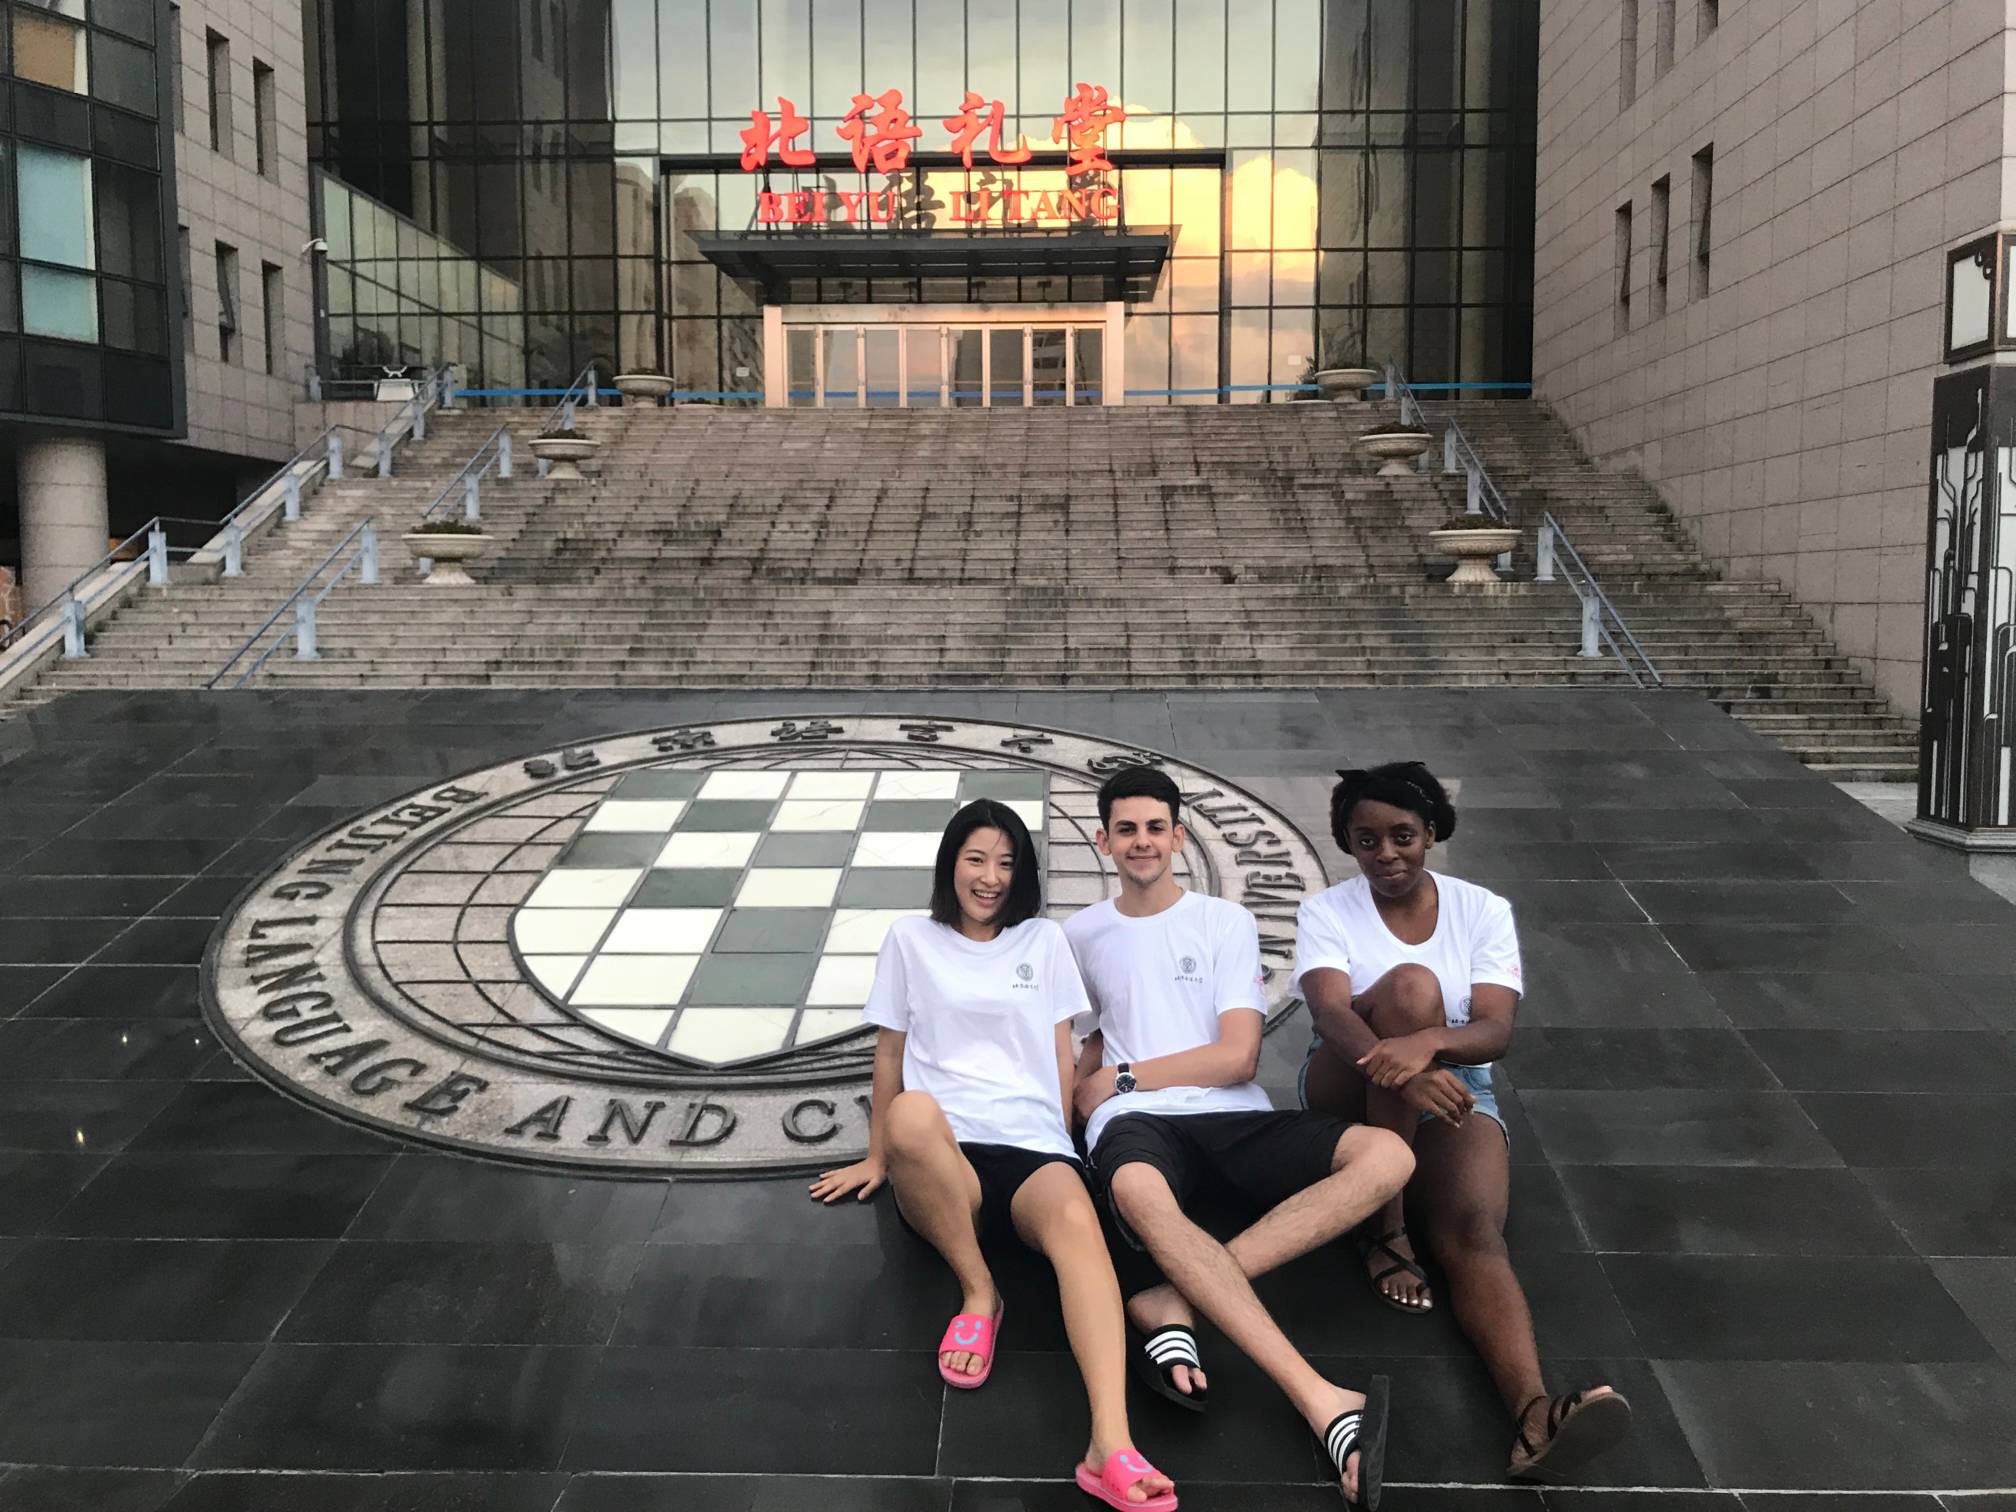 two women, one man sitting on ground in front of building, text embedded around seal reads "Beijing Language and Culture University"